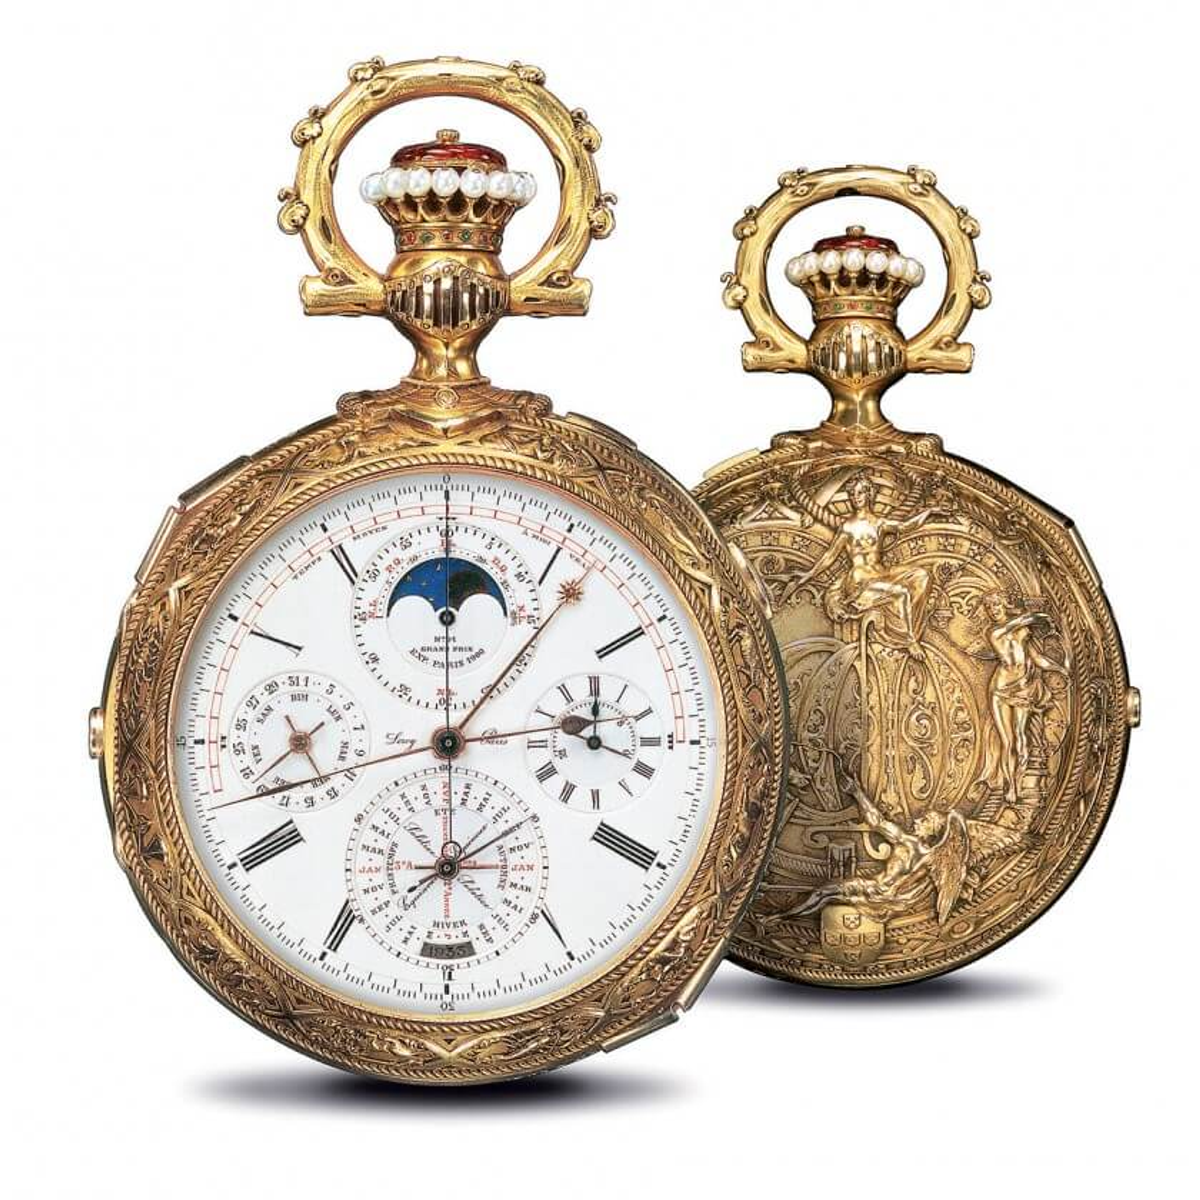 Leroy 01 pocket-watch presented at the Paris World’s Fair in 1900